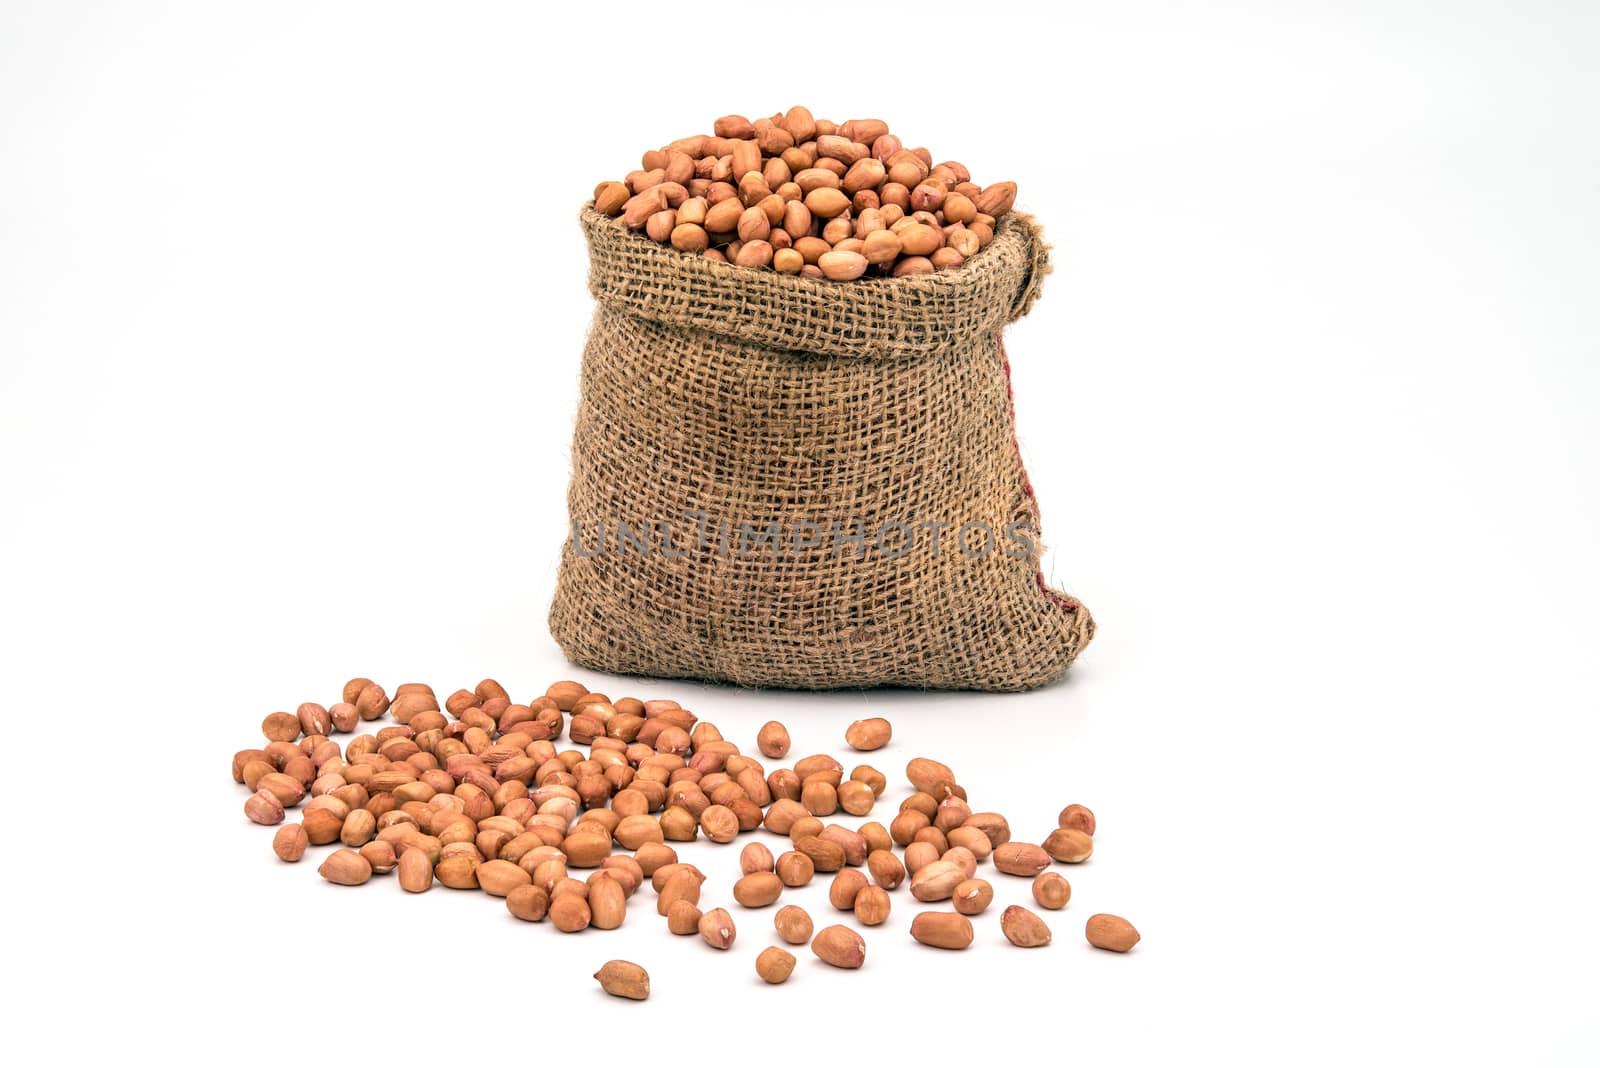 Bag Full of Peanuts on White Background